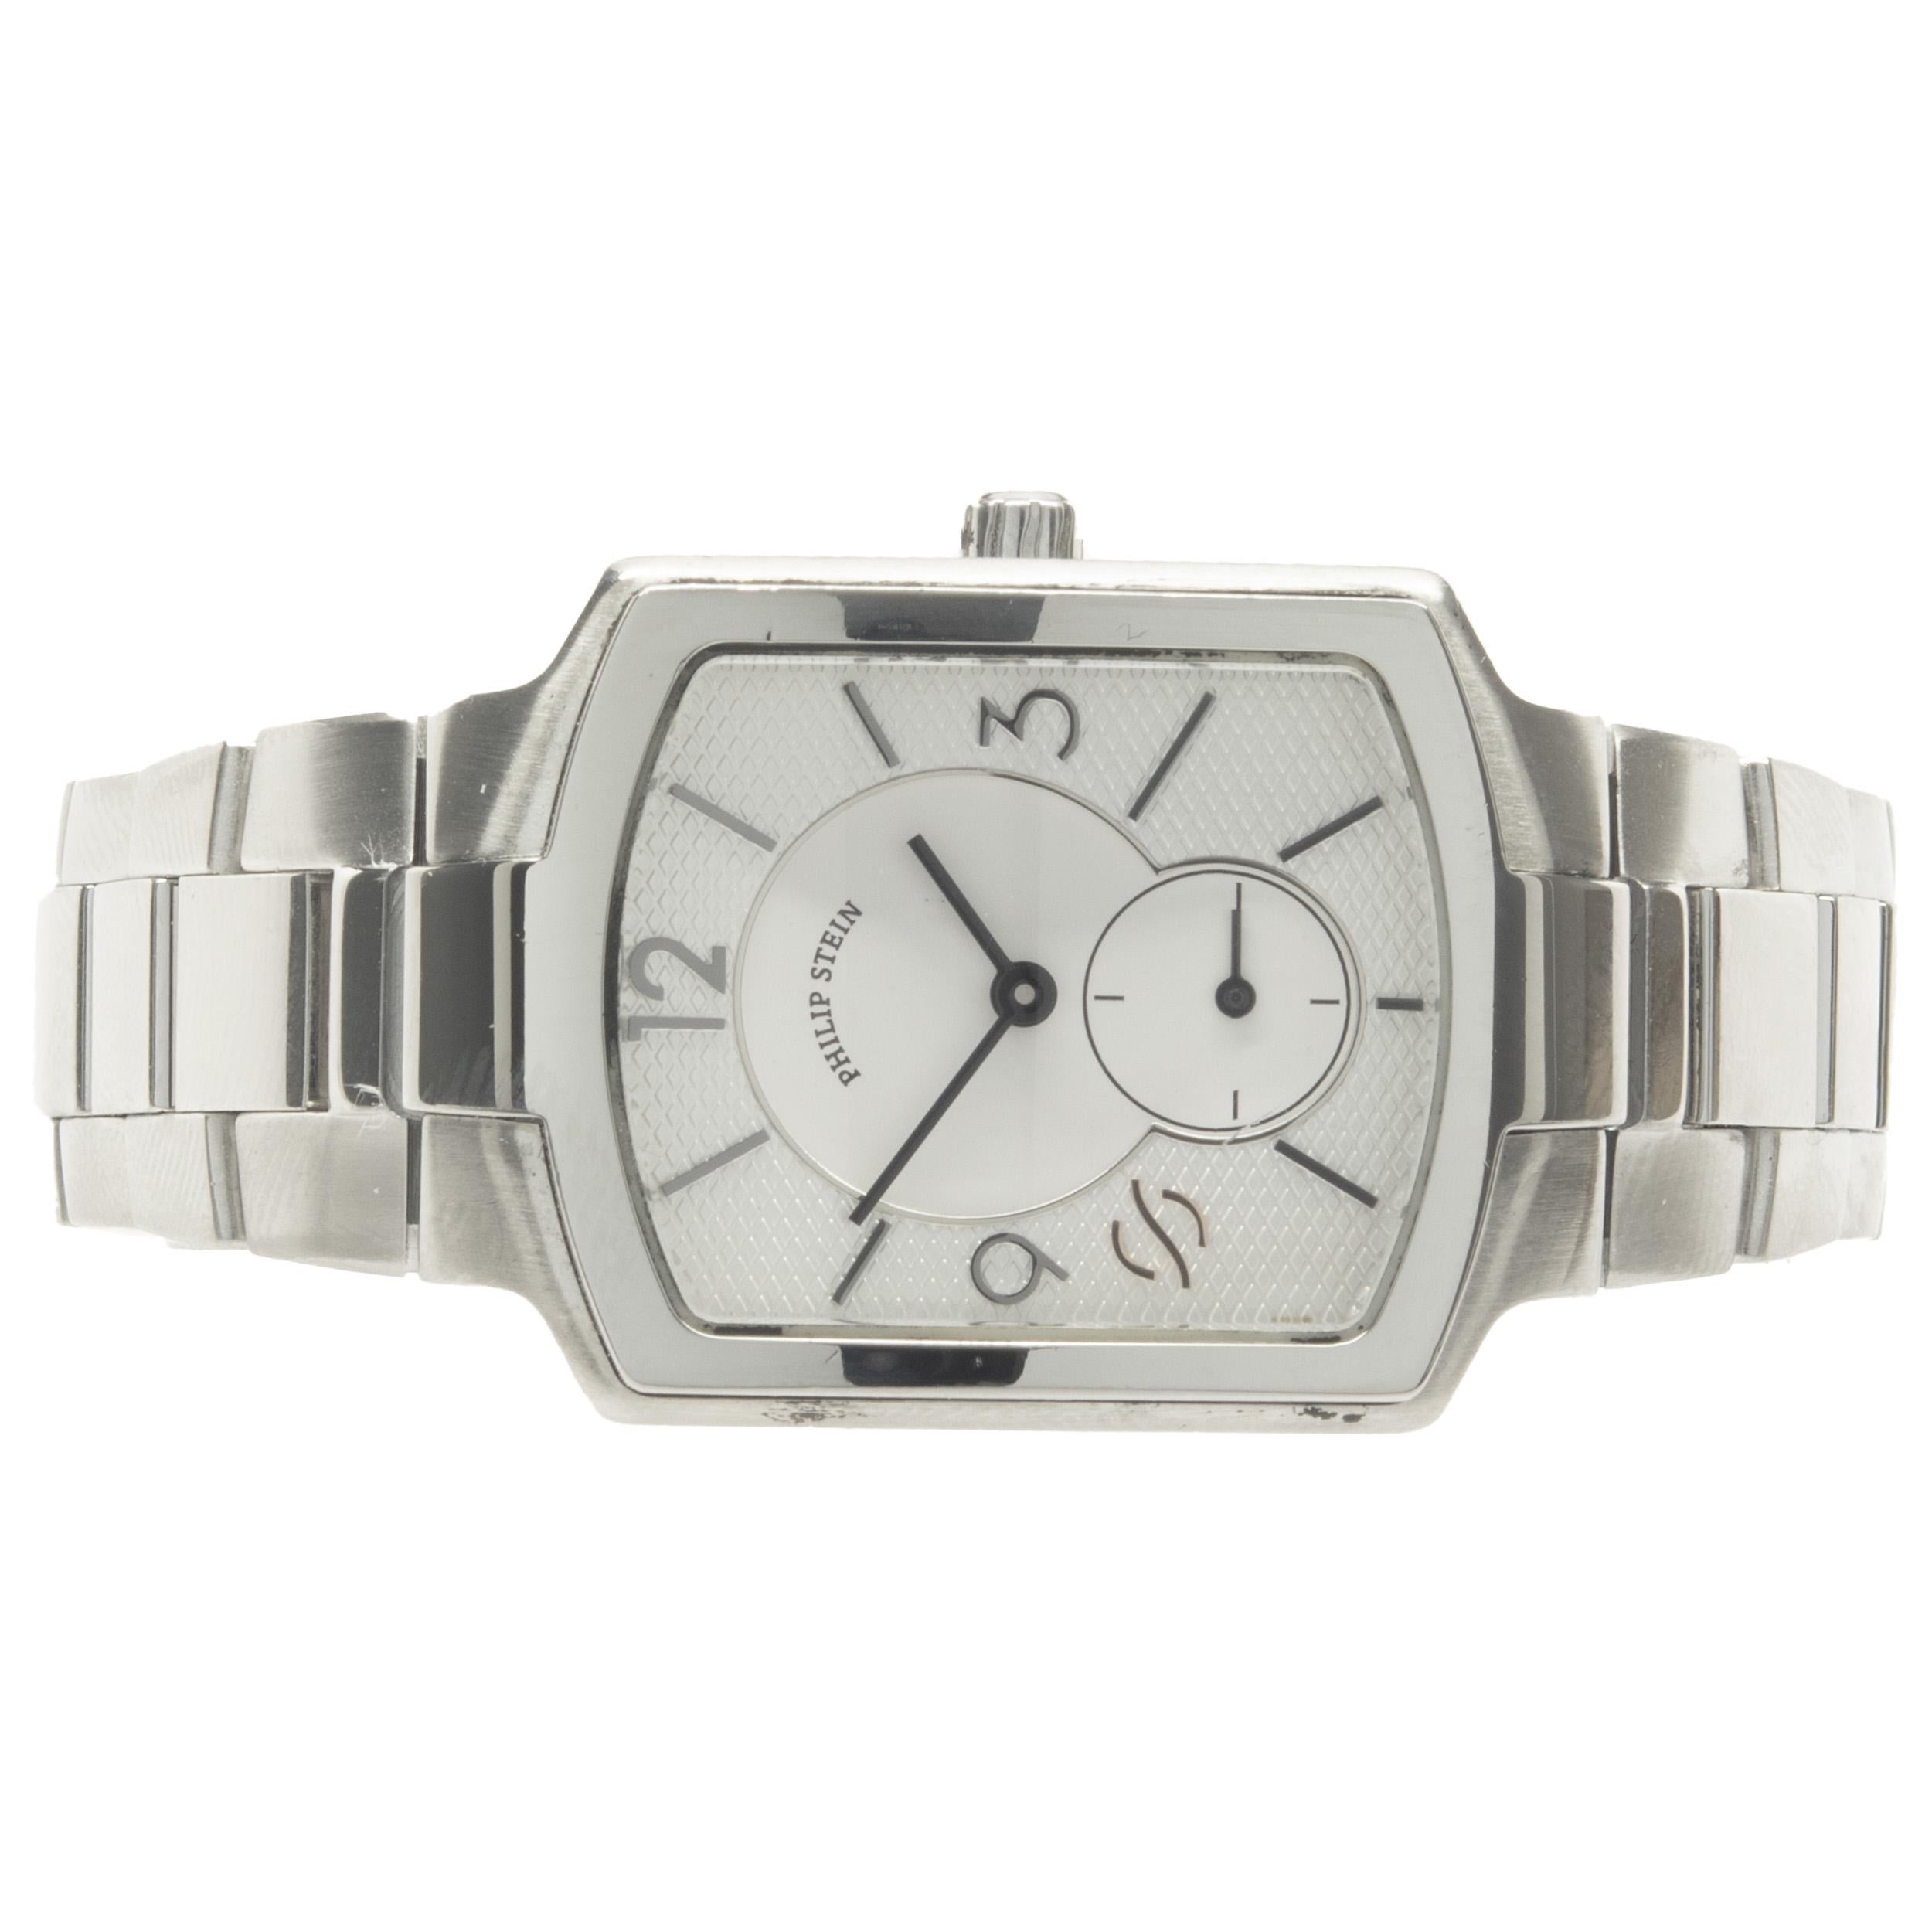 Movement: quartz
Function: hours, minutes
Case: 30.25mm stainless steel case with sapphire crystal, smooth bezel, stainless steel winding crowns, water resistant to 30 meters
Band: stainless steel, integrated clasp
Dial: white stick /